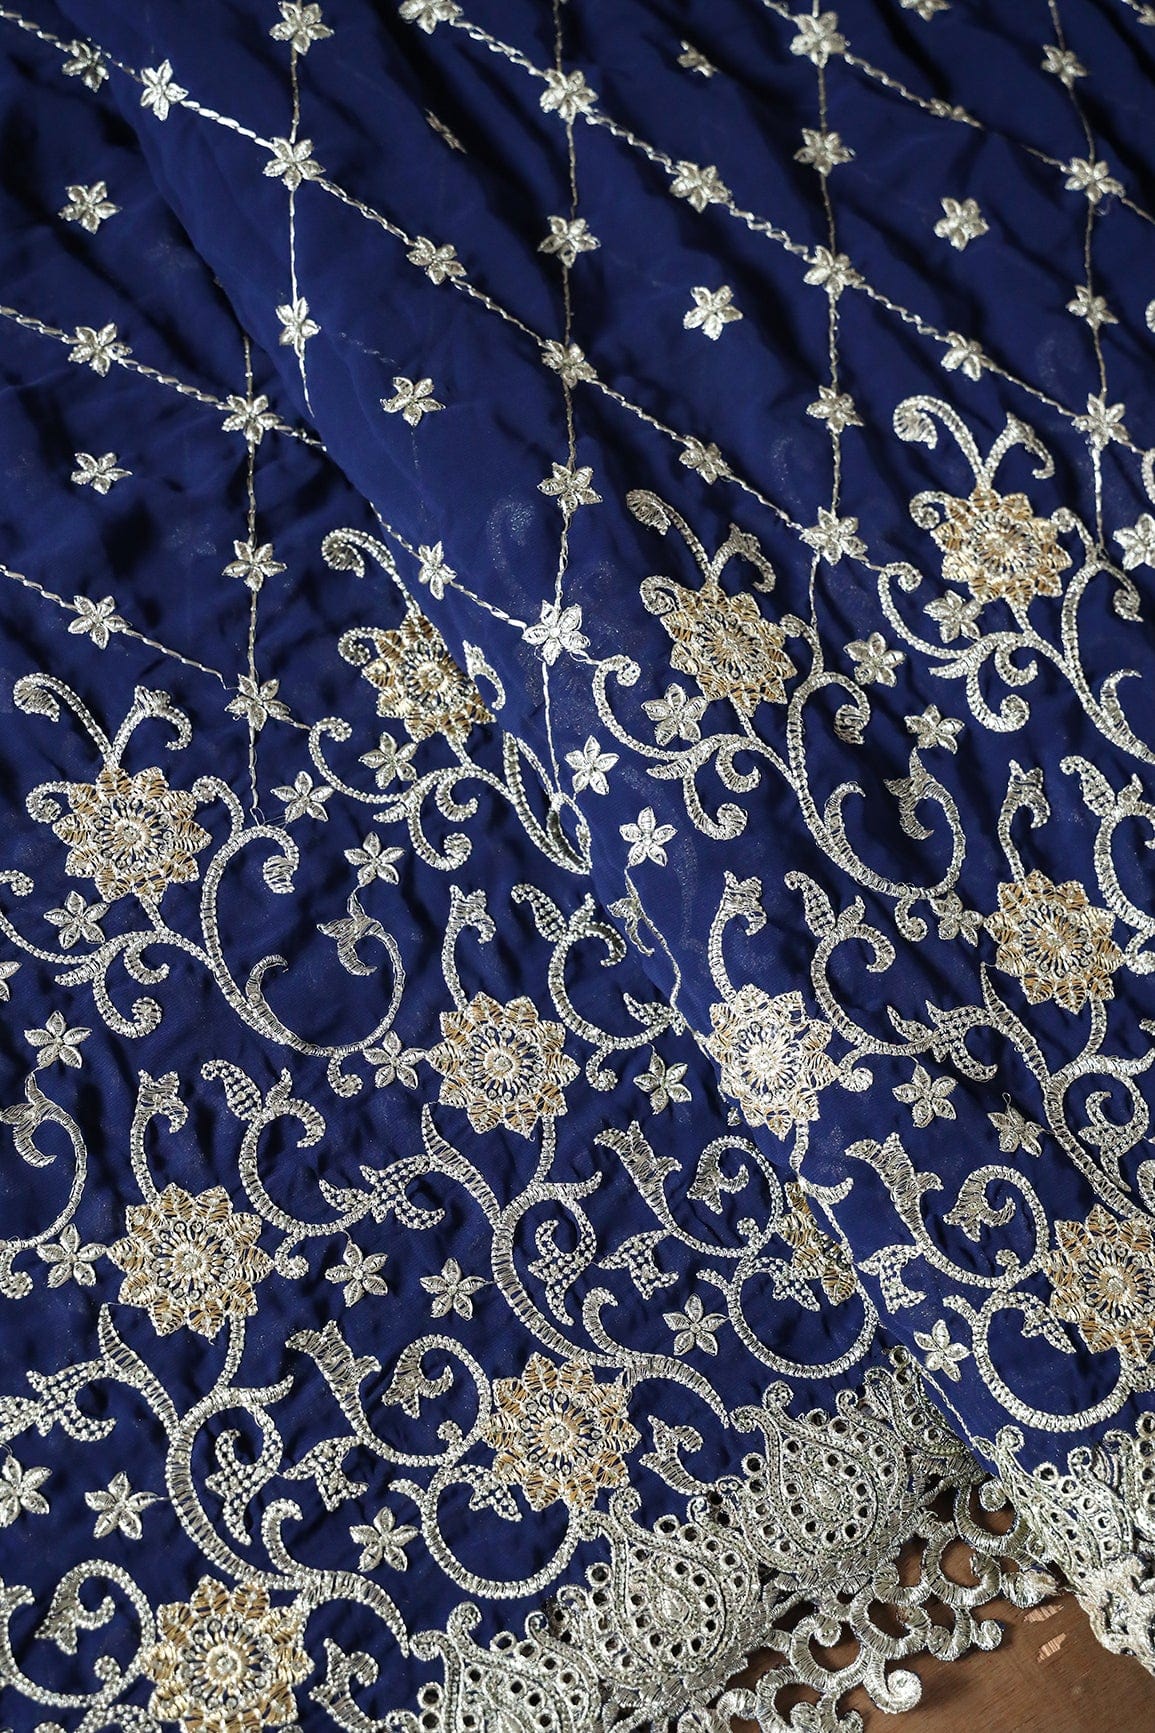 doeraa Embroidery Fabrics Big Width''56'' Gold And Silver Zari Floral Embroidery Work On Navy Blue Georgette Fabric With Border